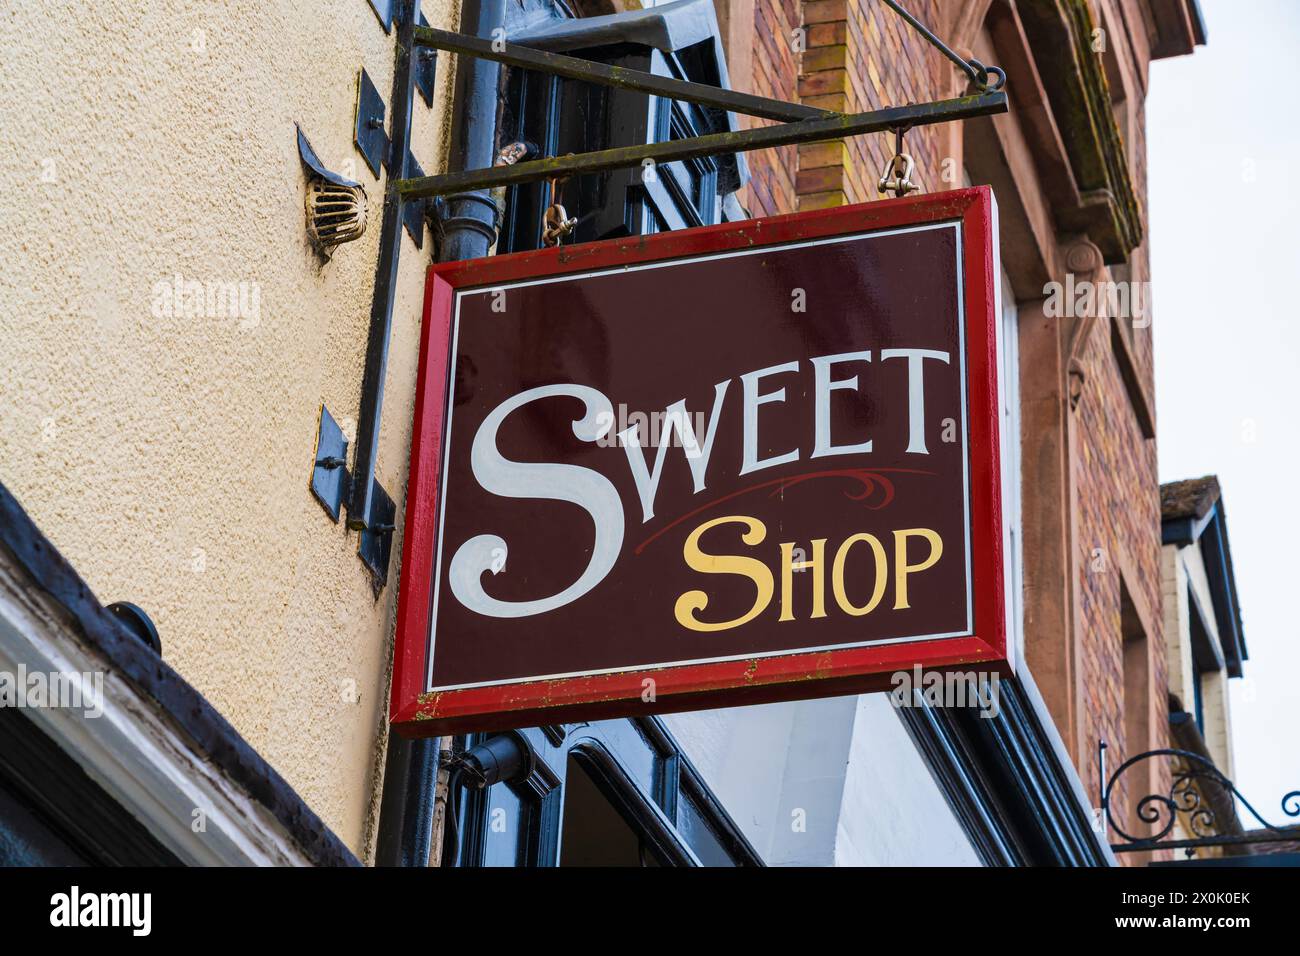 Sign board for a sweet shop, Hanging sign outside a candy store Stock Photo